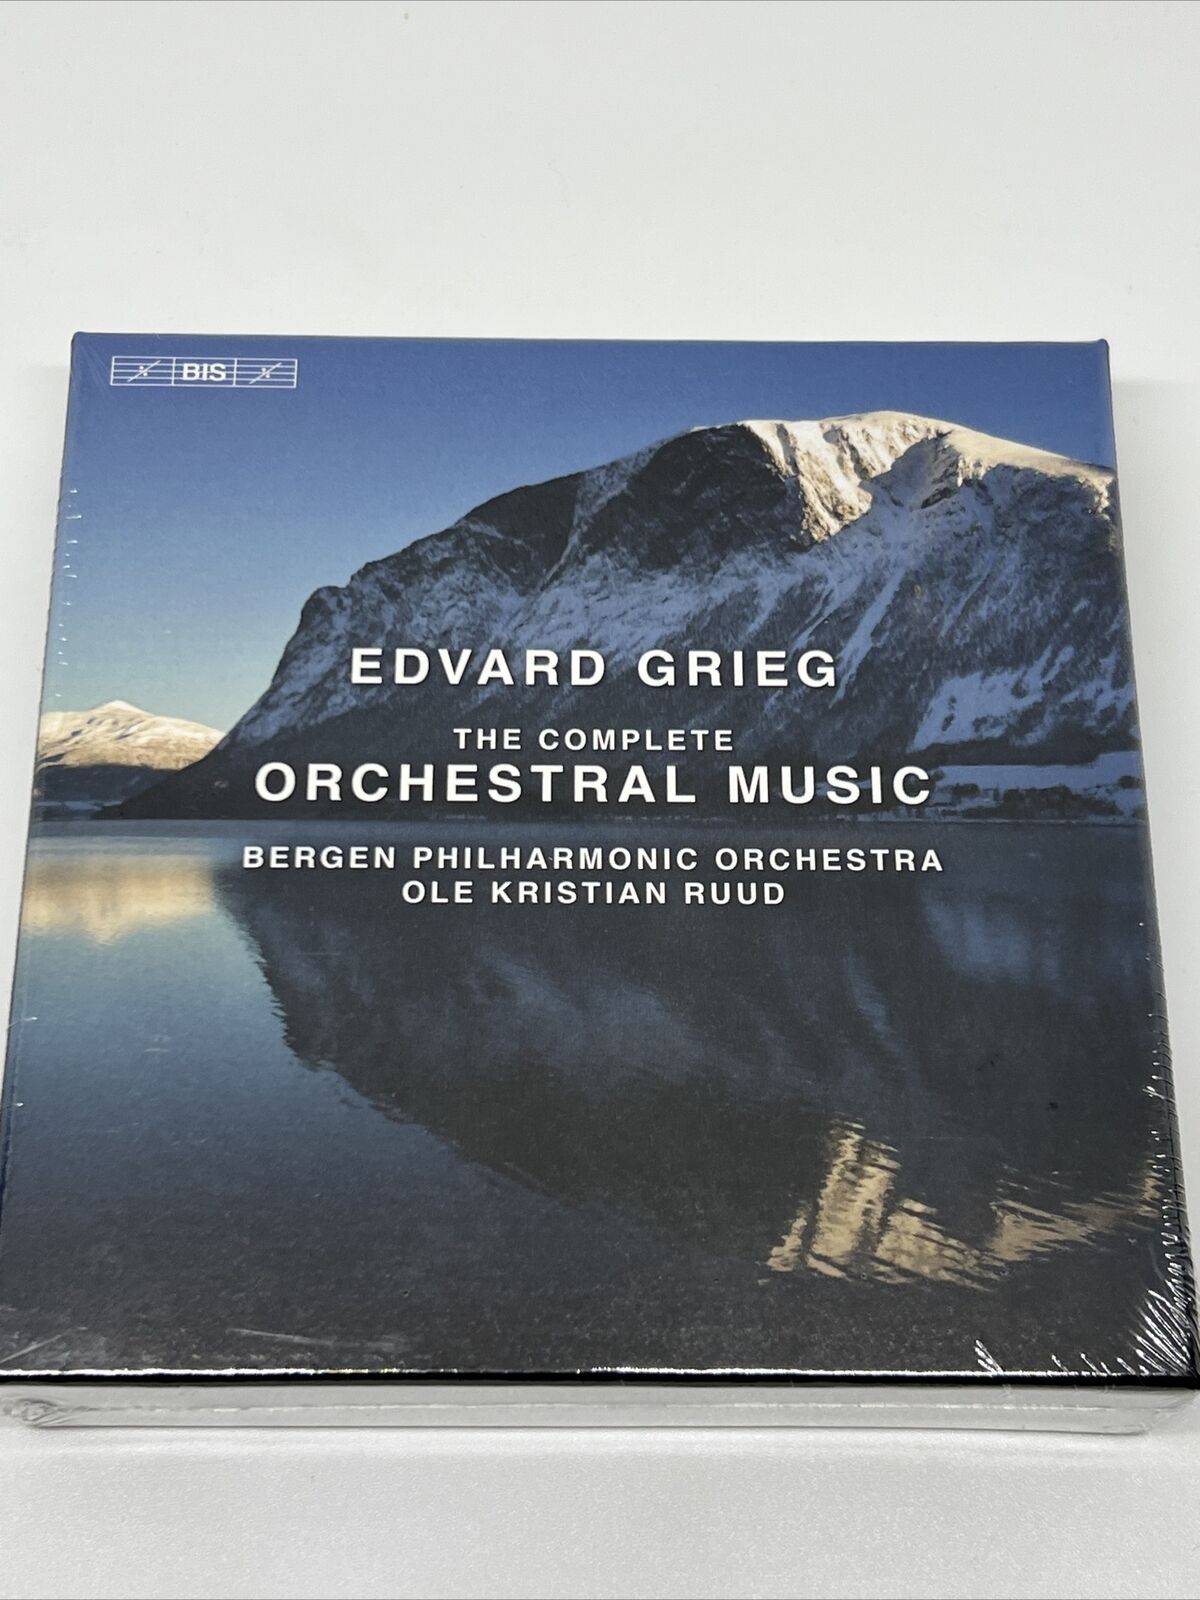 Edvard Grieg - The Complete Orchestral Music - Bergen Philharmonic Orchestra CD